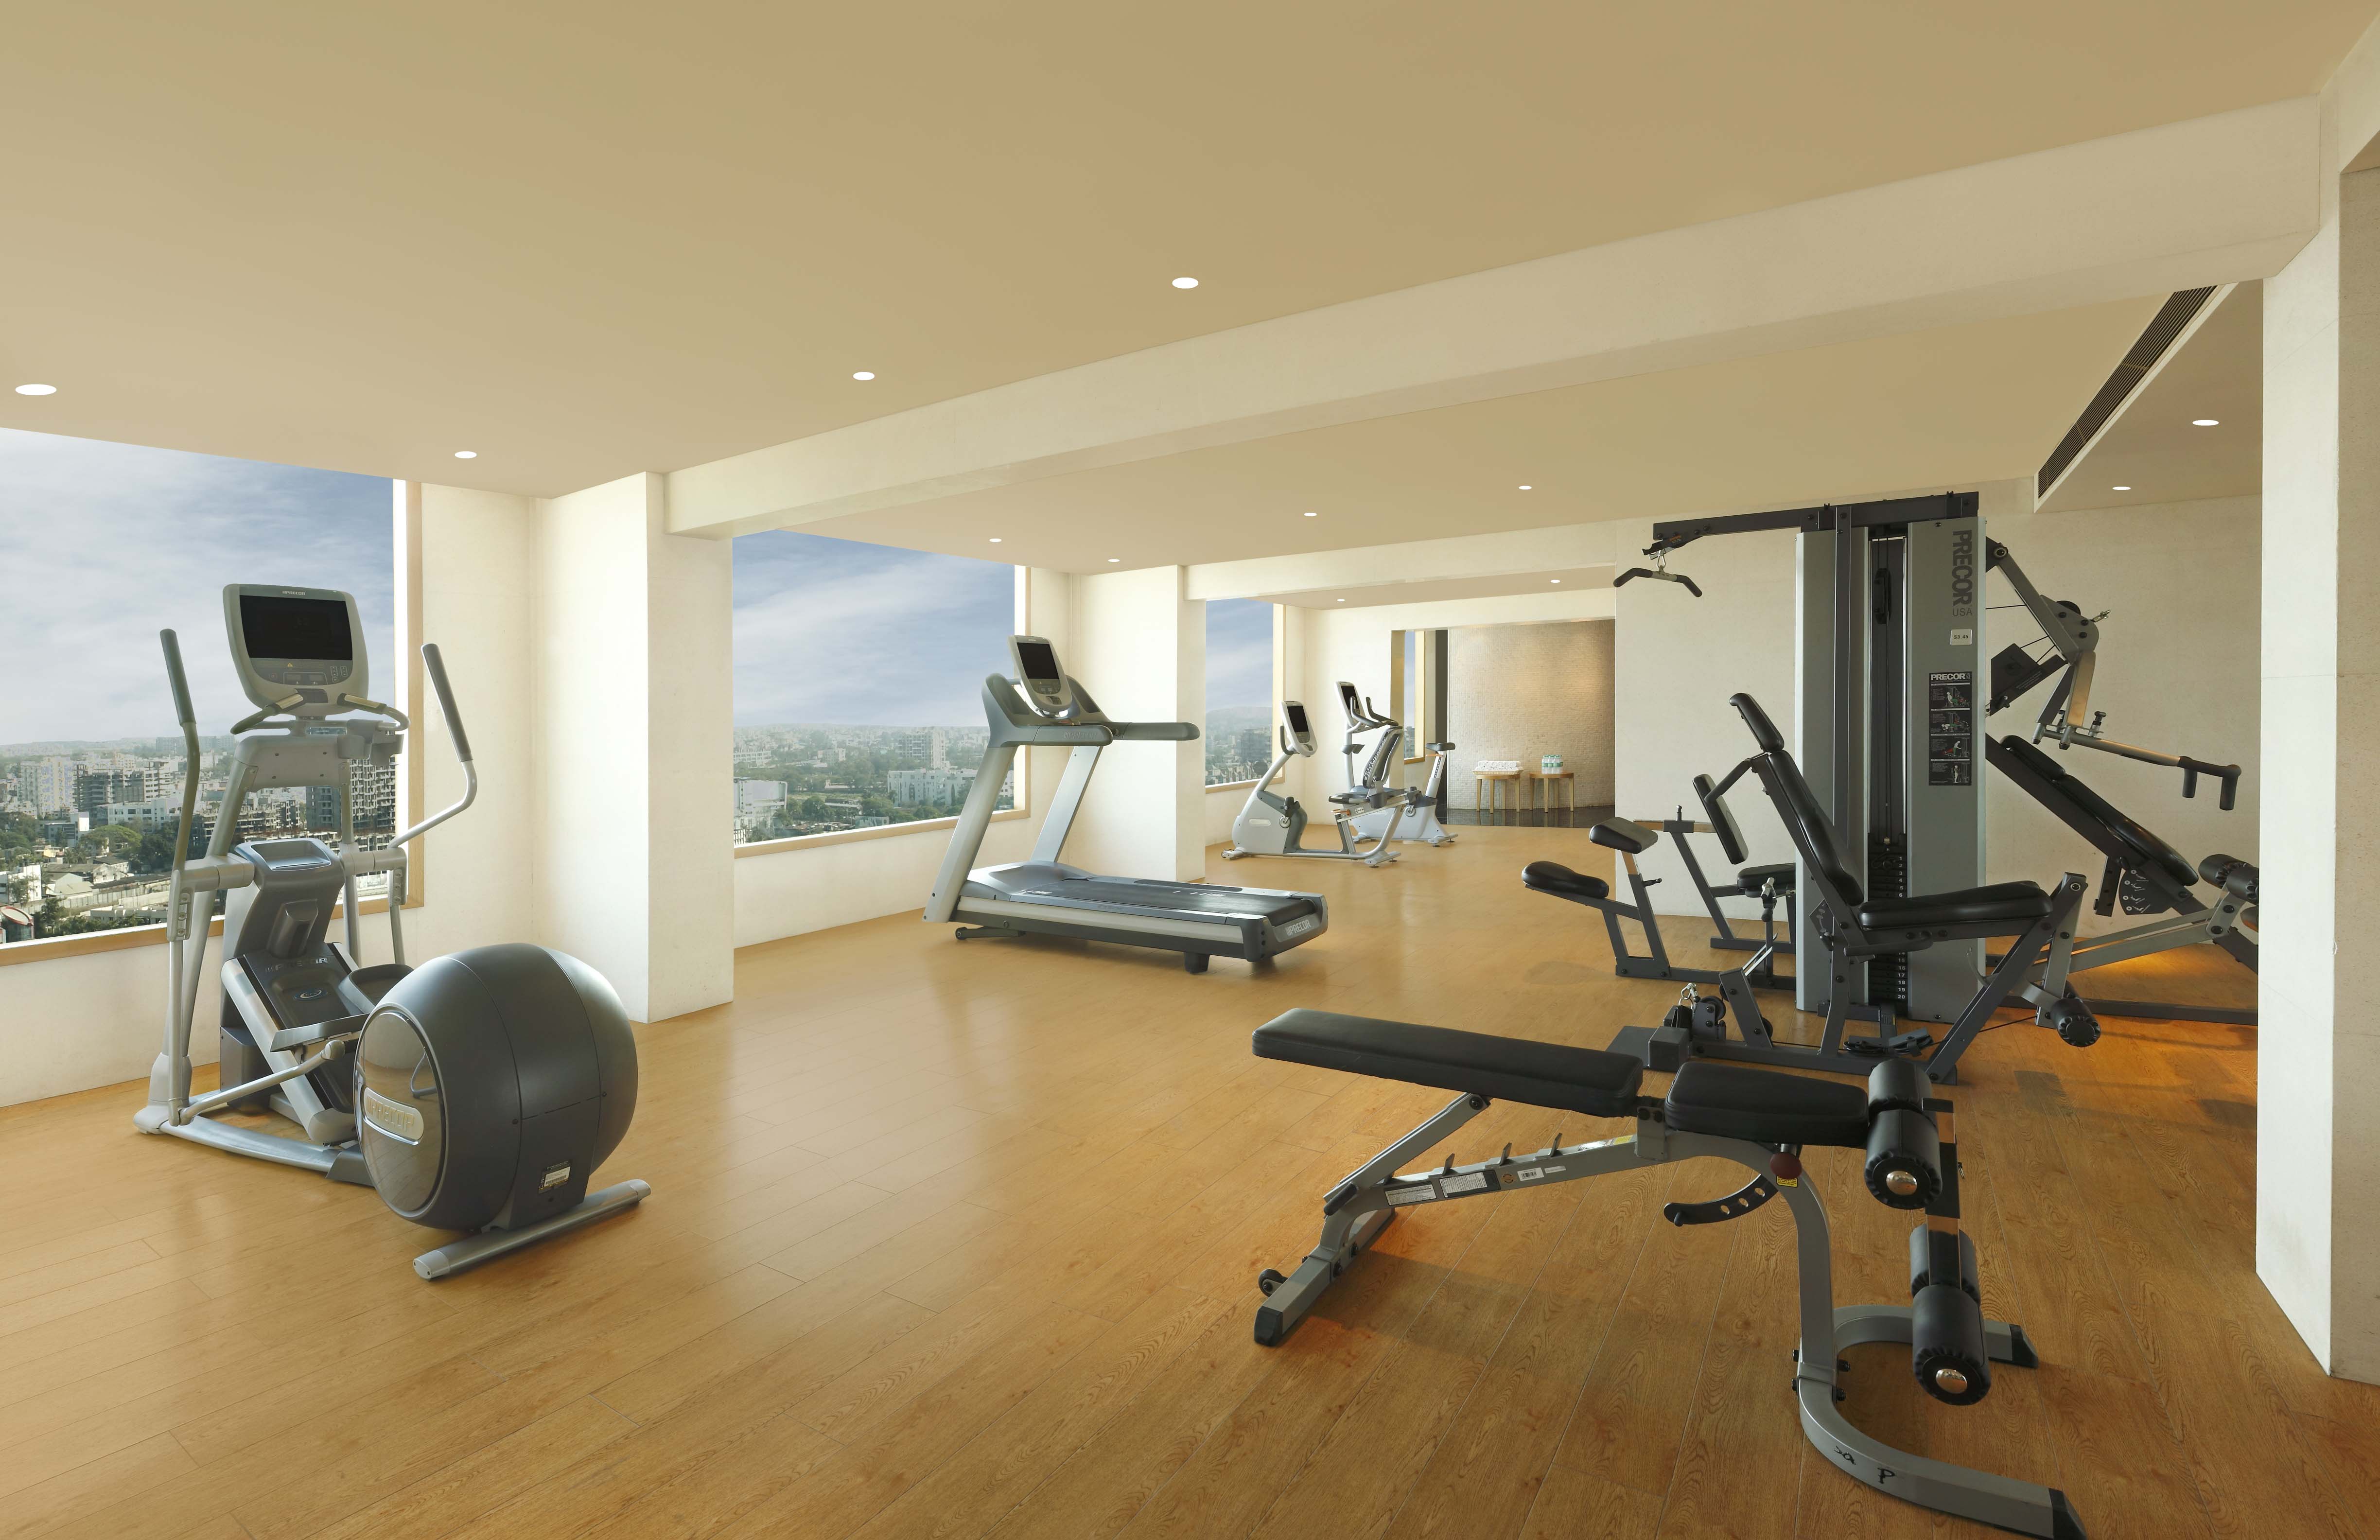 Gym With Cardio Equipment Facing Large Windows and Weight Machines